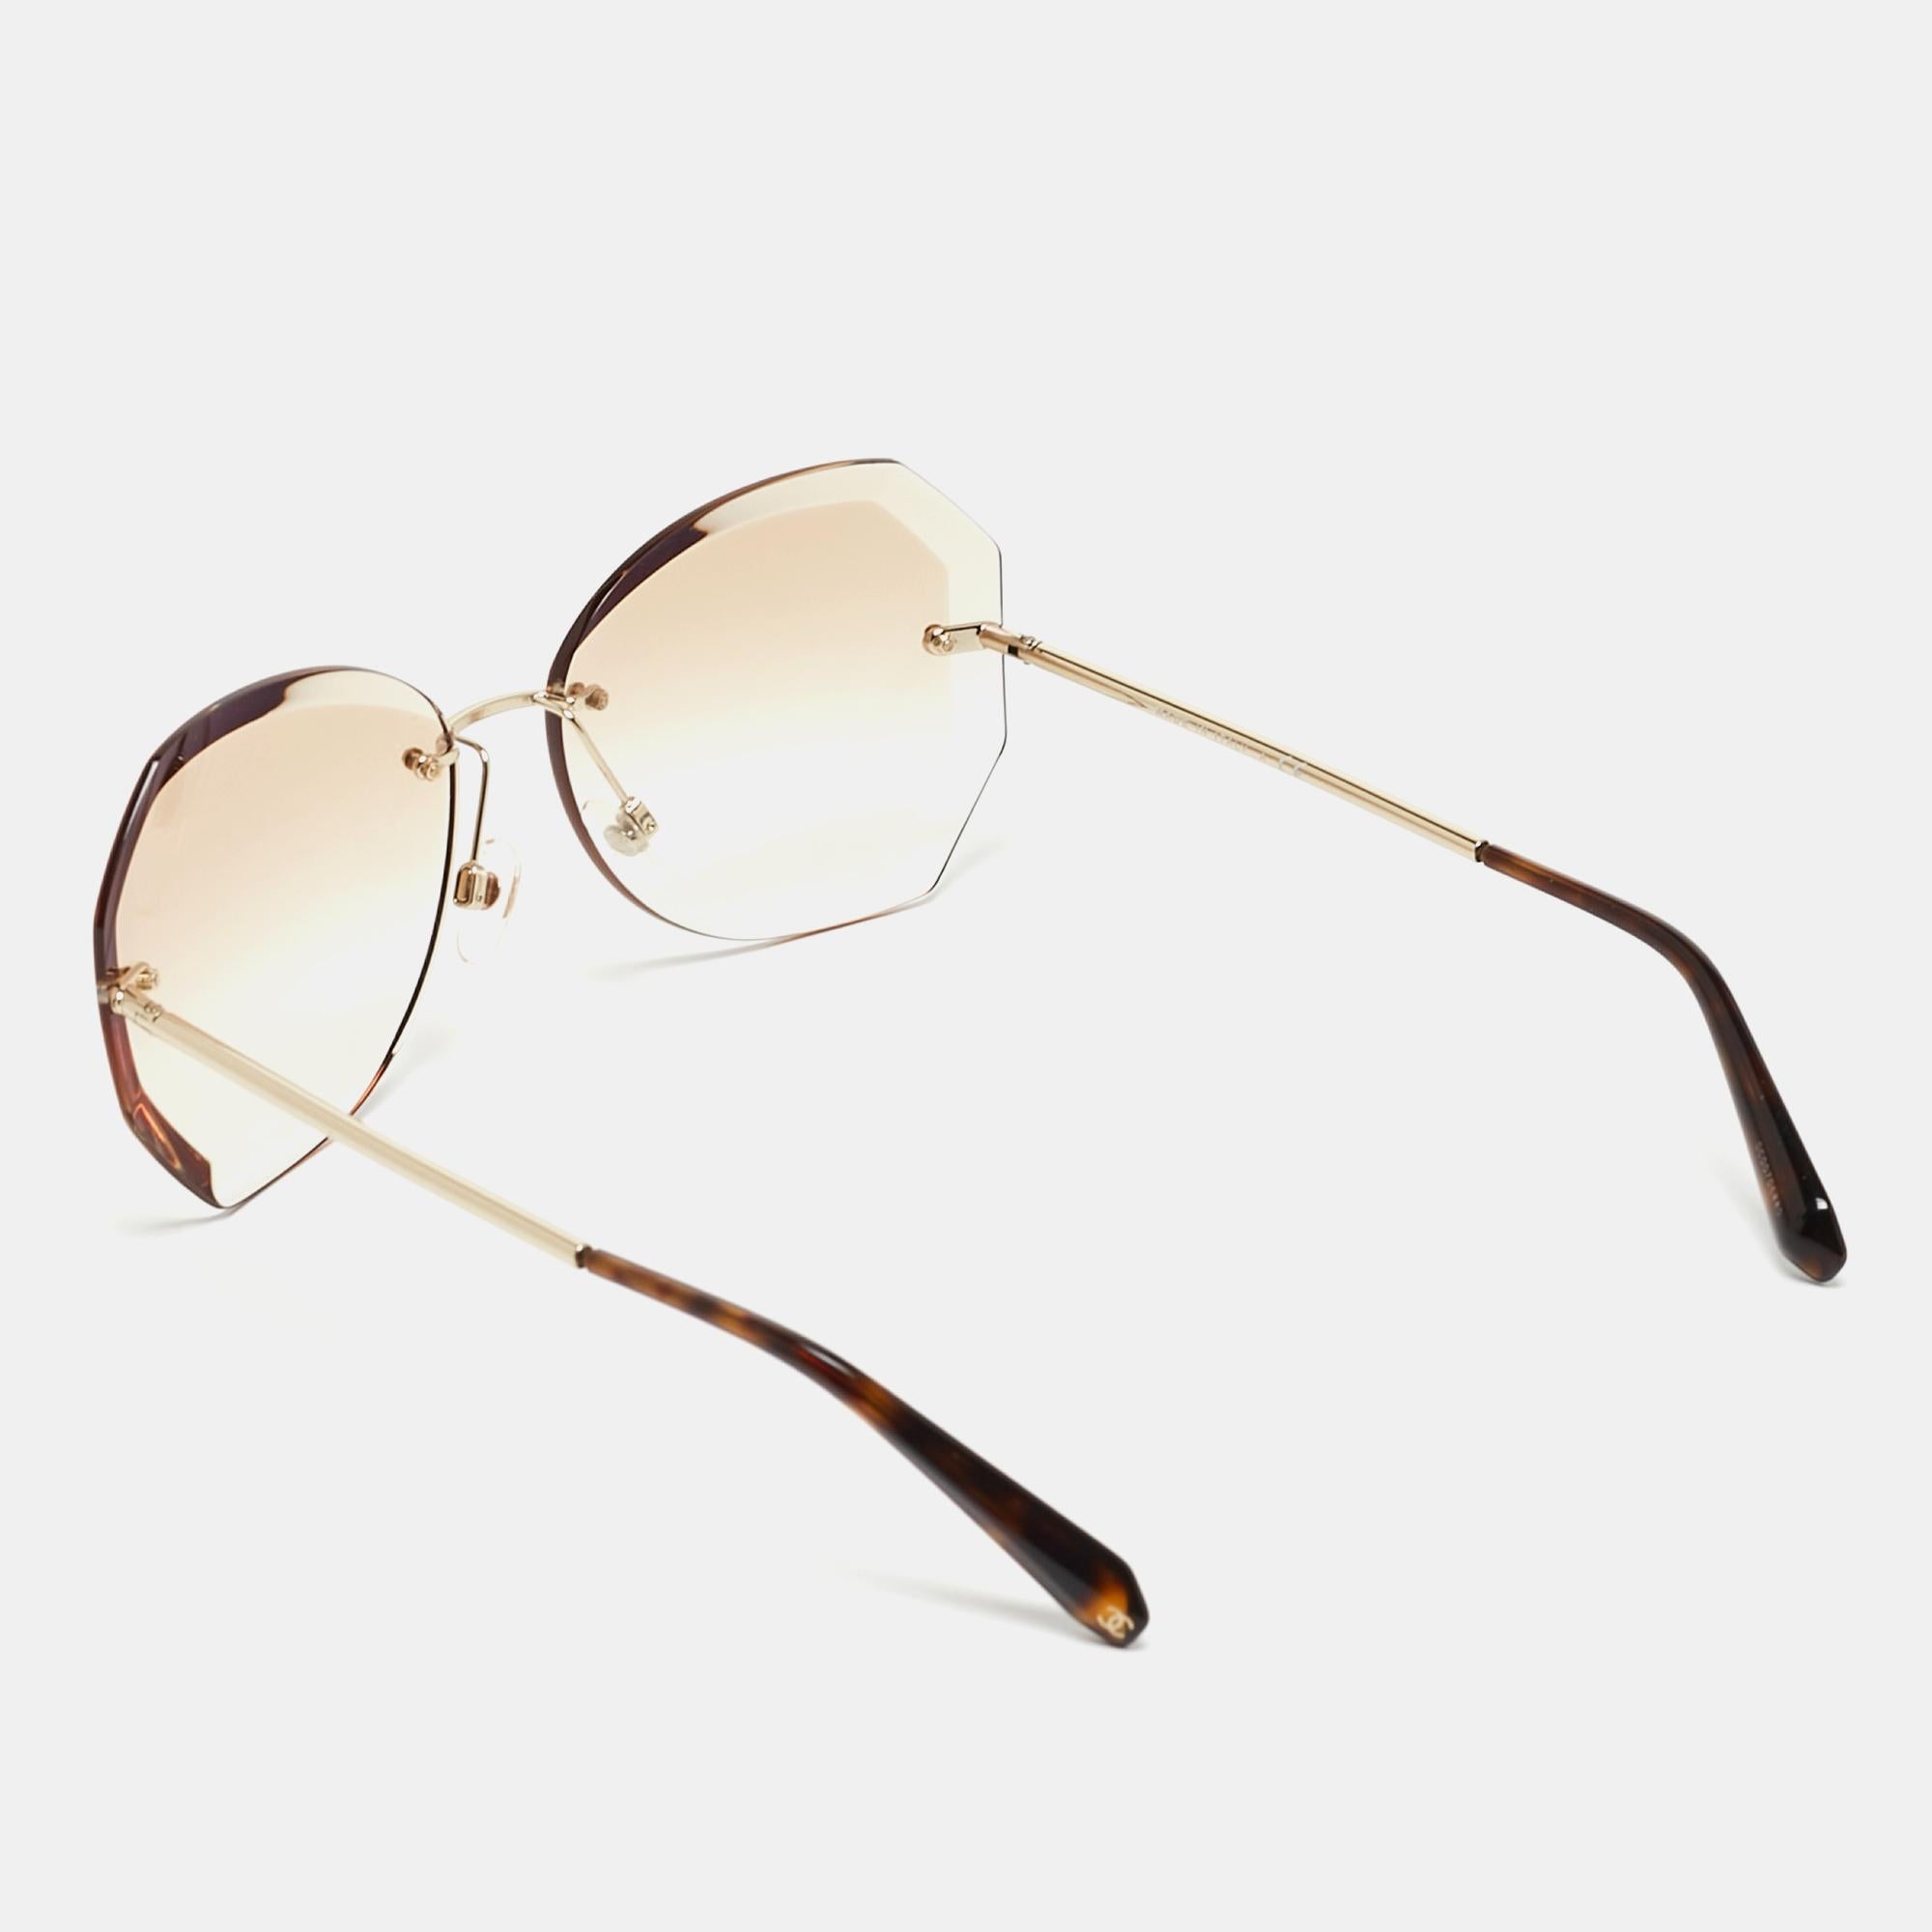 We see the detailing on this exquisite pair of designer sunglasses made from fine materials. The sunglasses are luxe in appeal and practical in usage.

